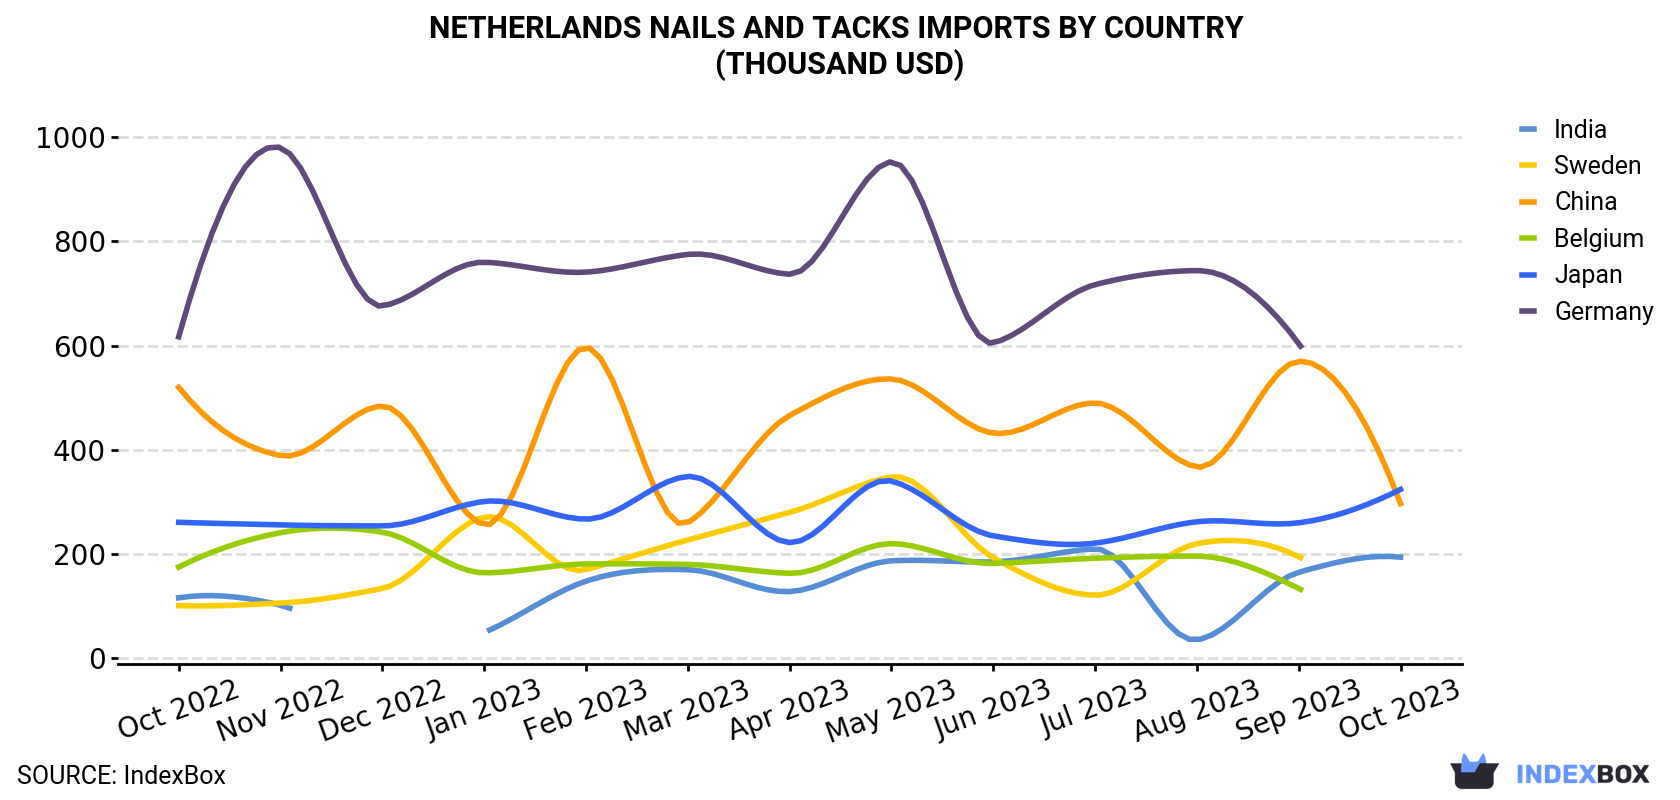 Netherlands Nails And Tacks Imports By Country (Thousand USD)